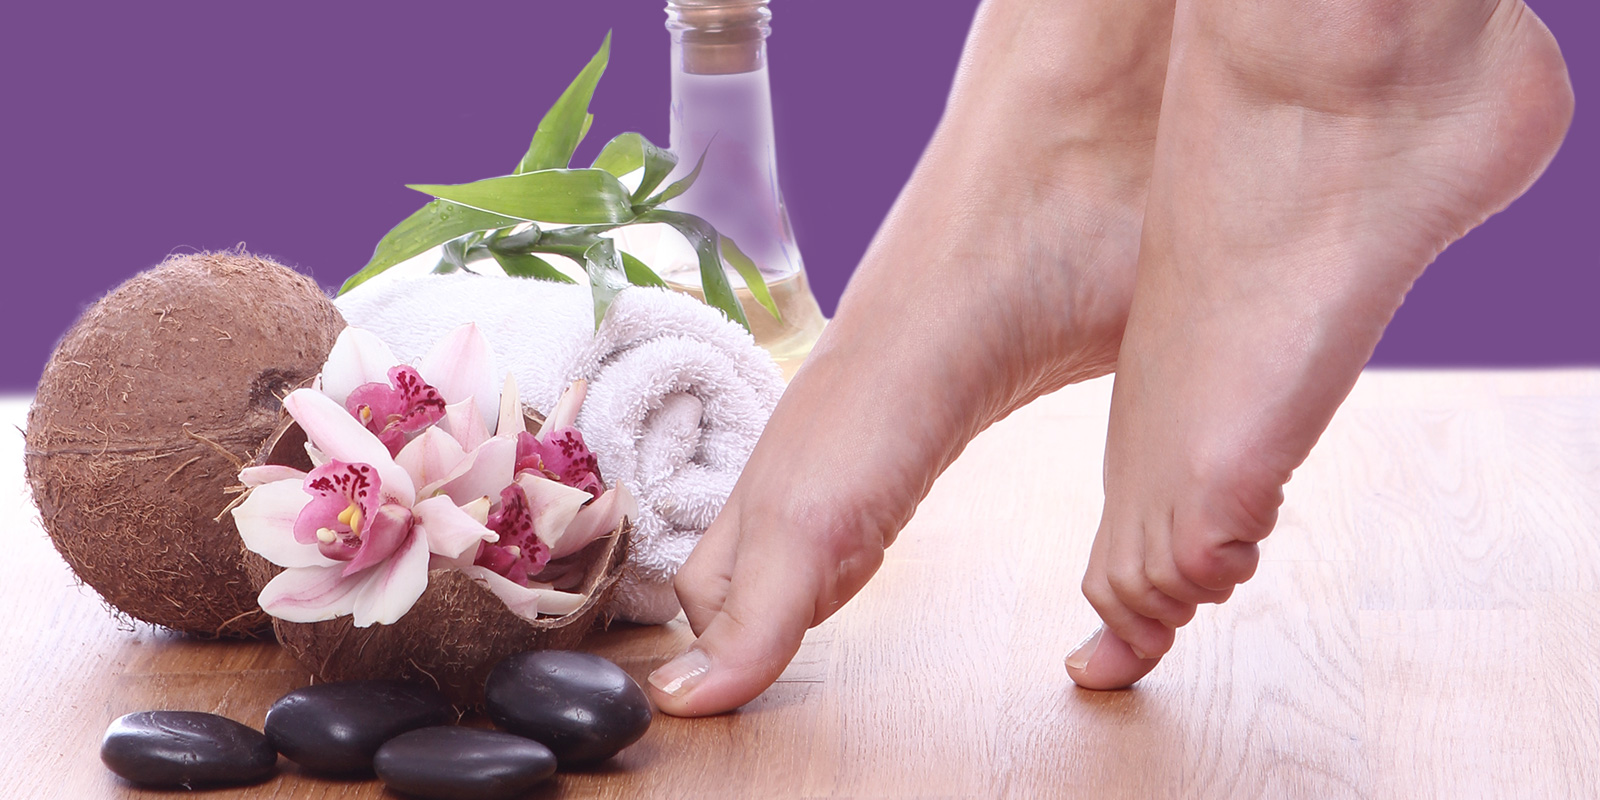 Foot Massage Benefits to Relieve Stress and Pain